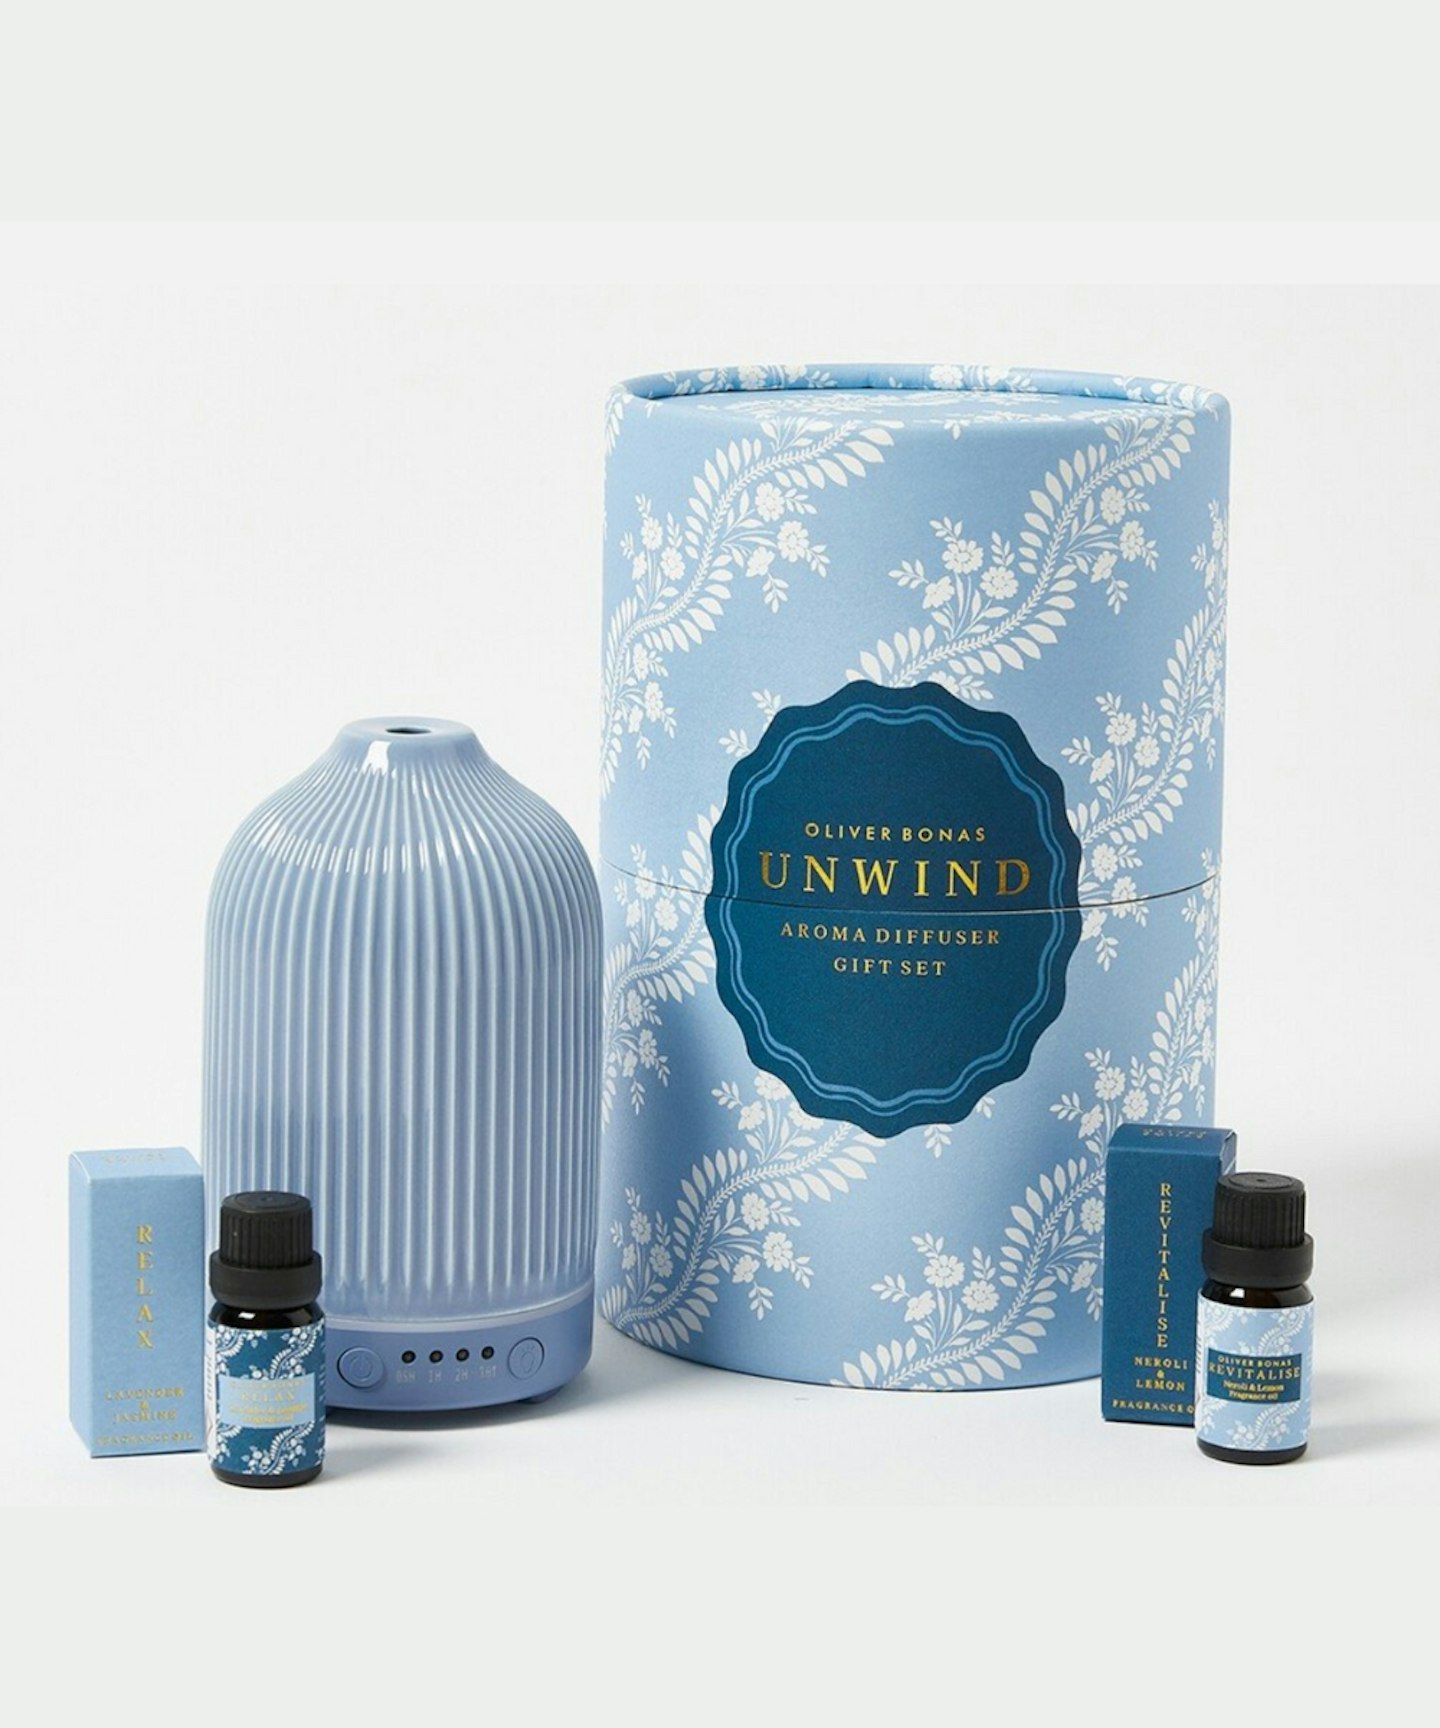 Dolores Blue Ceramic Aroma Diffuser & Set of Two Fragrance Oils